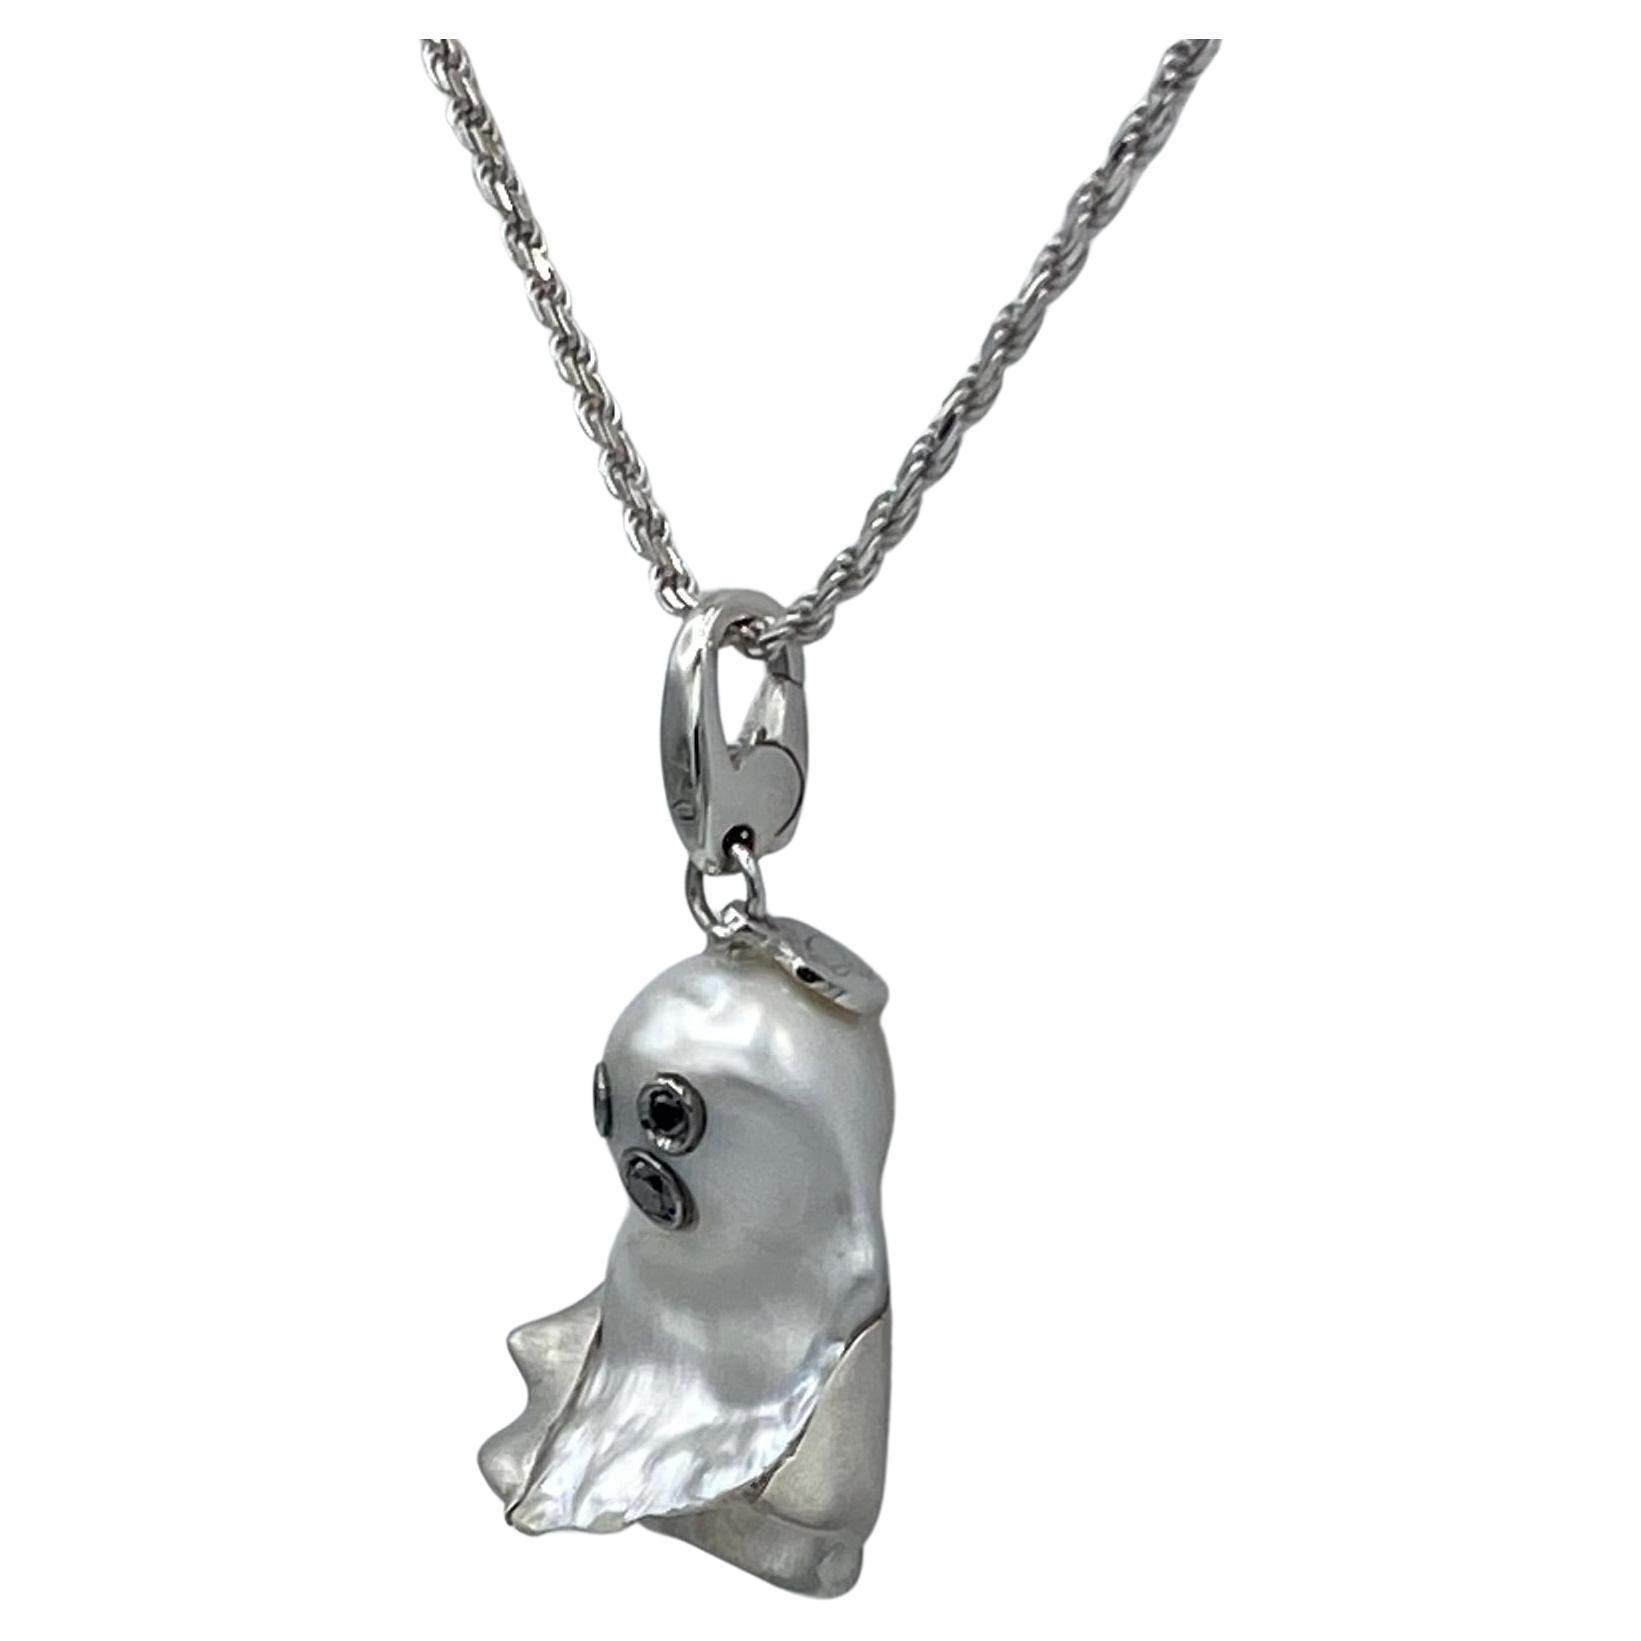 Ghost Australian Pearl Black Diamond 18Kt Gold Charm/Pendant Necklace Made in Italy
This is a little ghost made with an Australian pearl with a particular shape.
His coat is made from the pearl itself and to which I added a piece made of